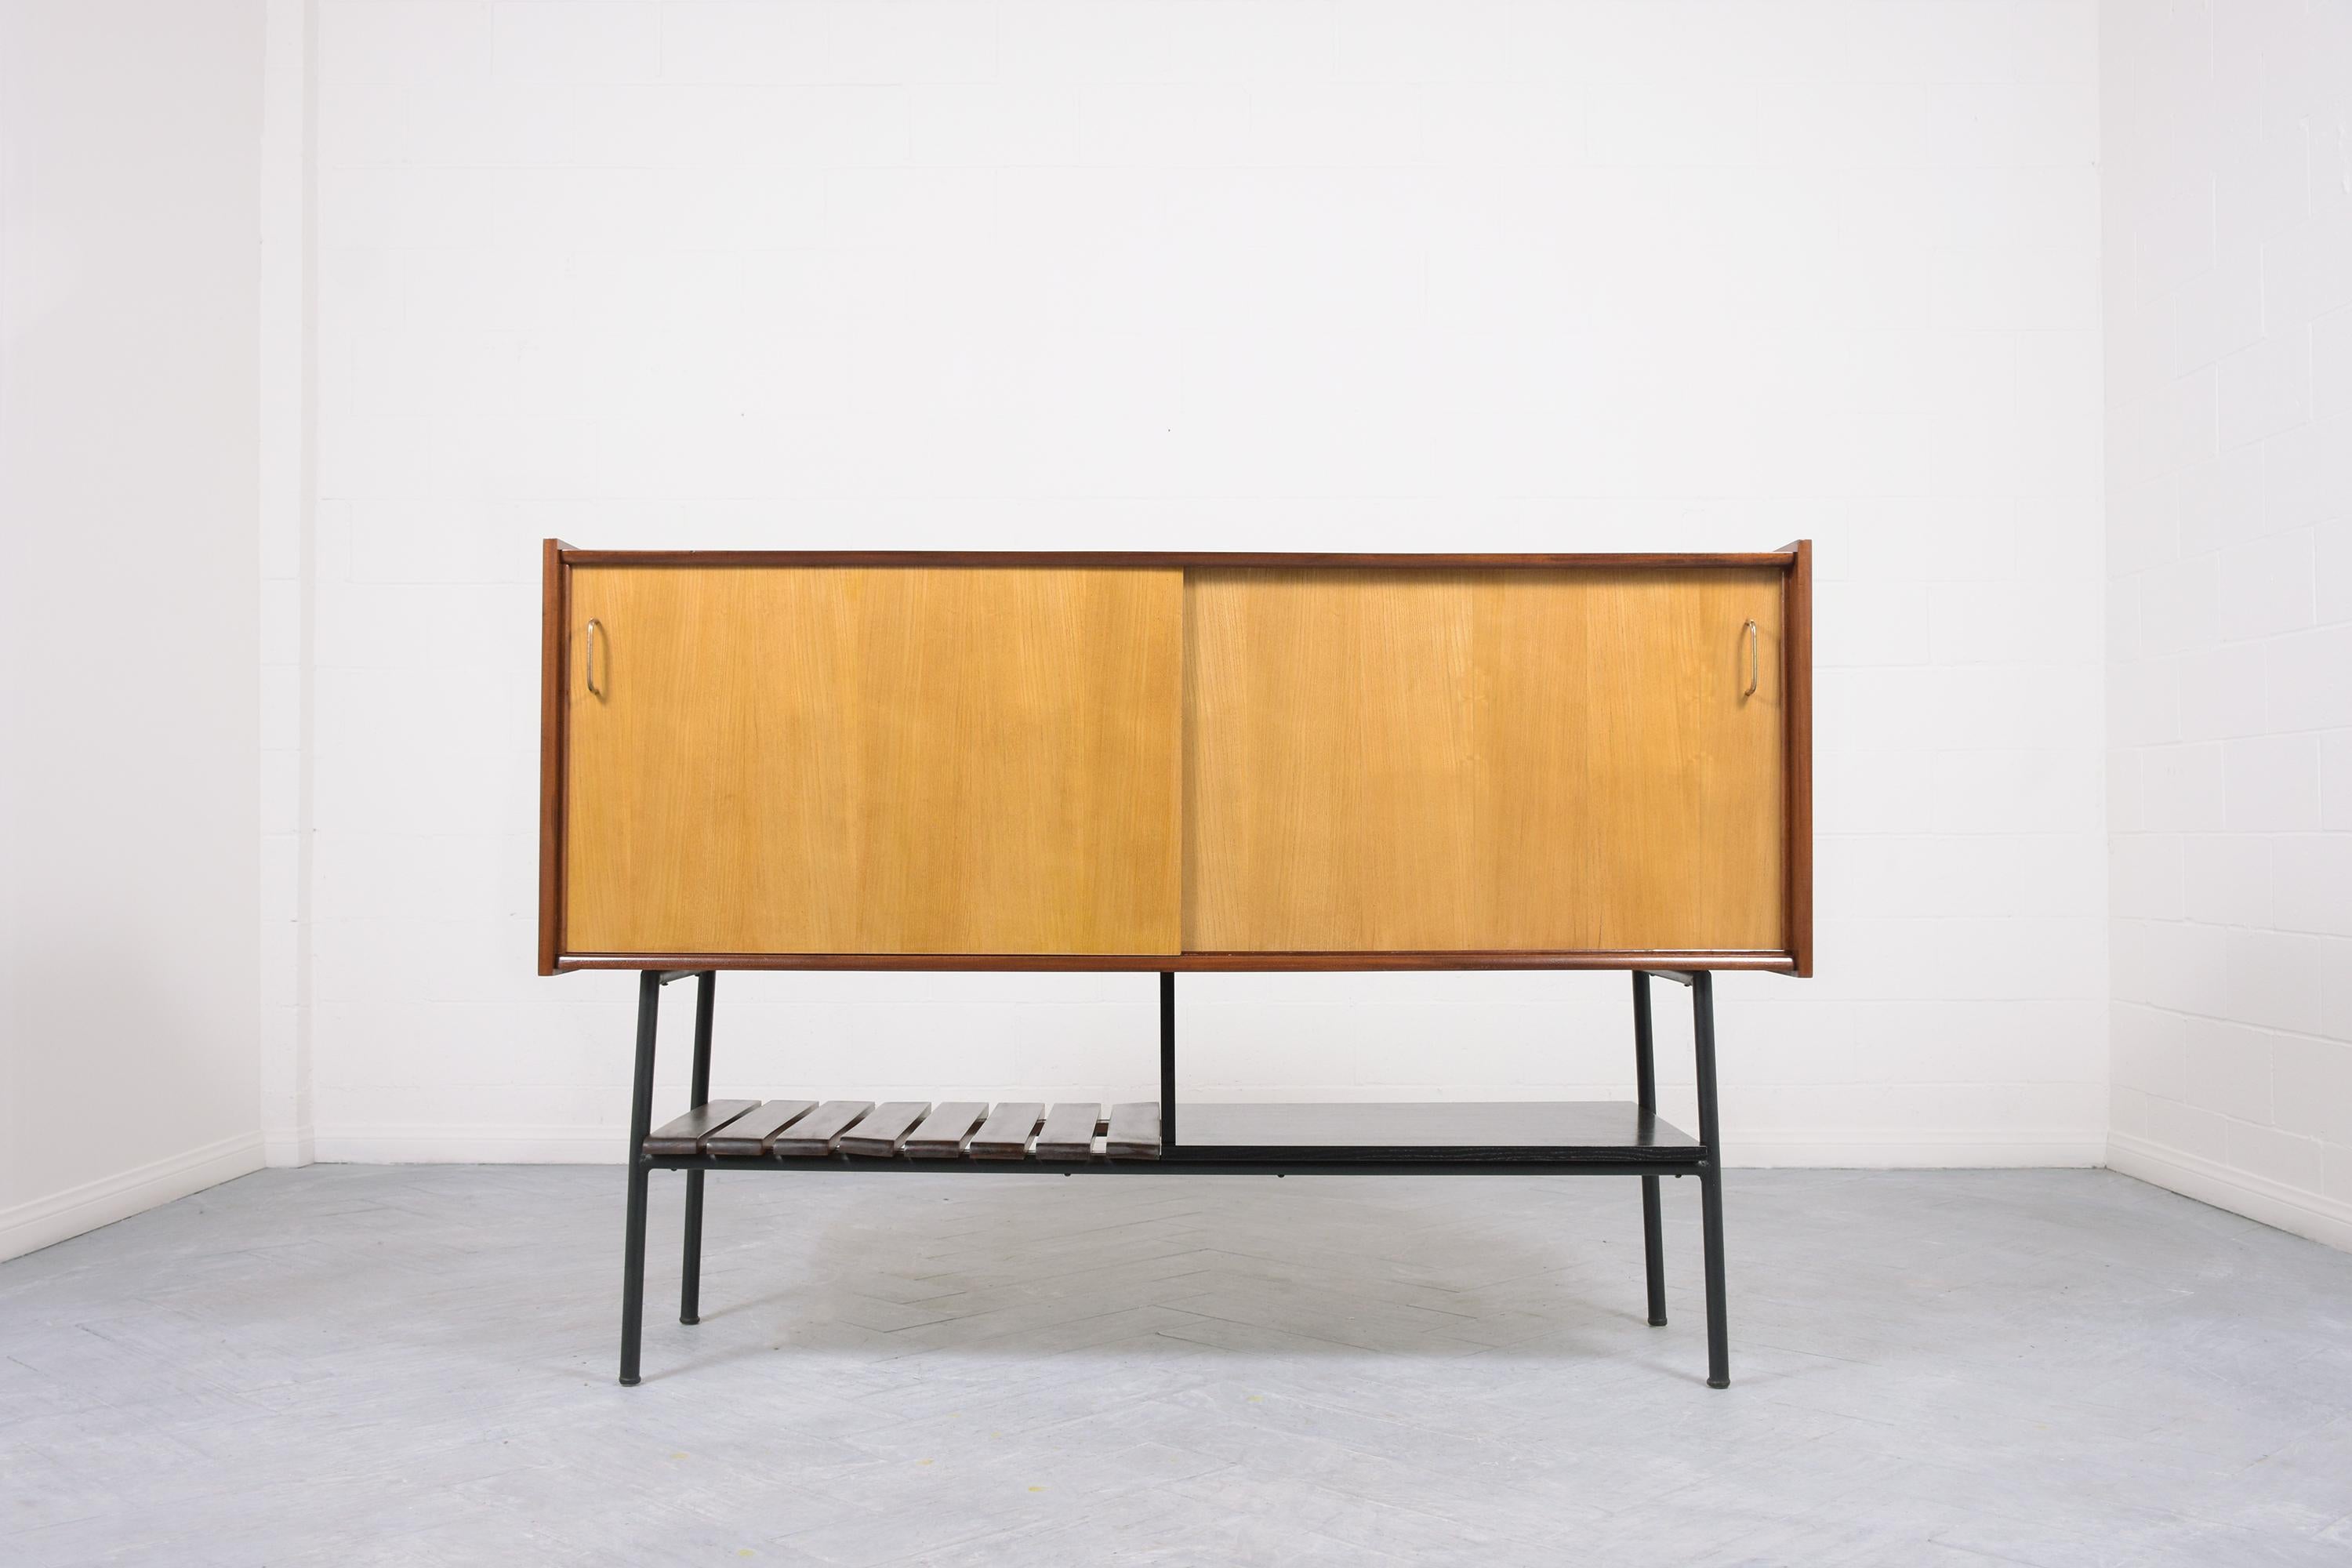 Step into a realm of vintage elegance with our French buffet, reminiscent of the celebrated style of René-Jean Caillette. Crafted with precision from rich mahogany and white oak wood, this mid-century modern credenza boasts great condition, having